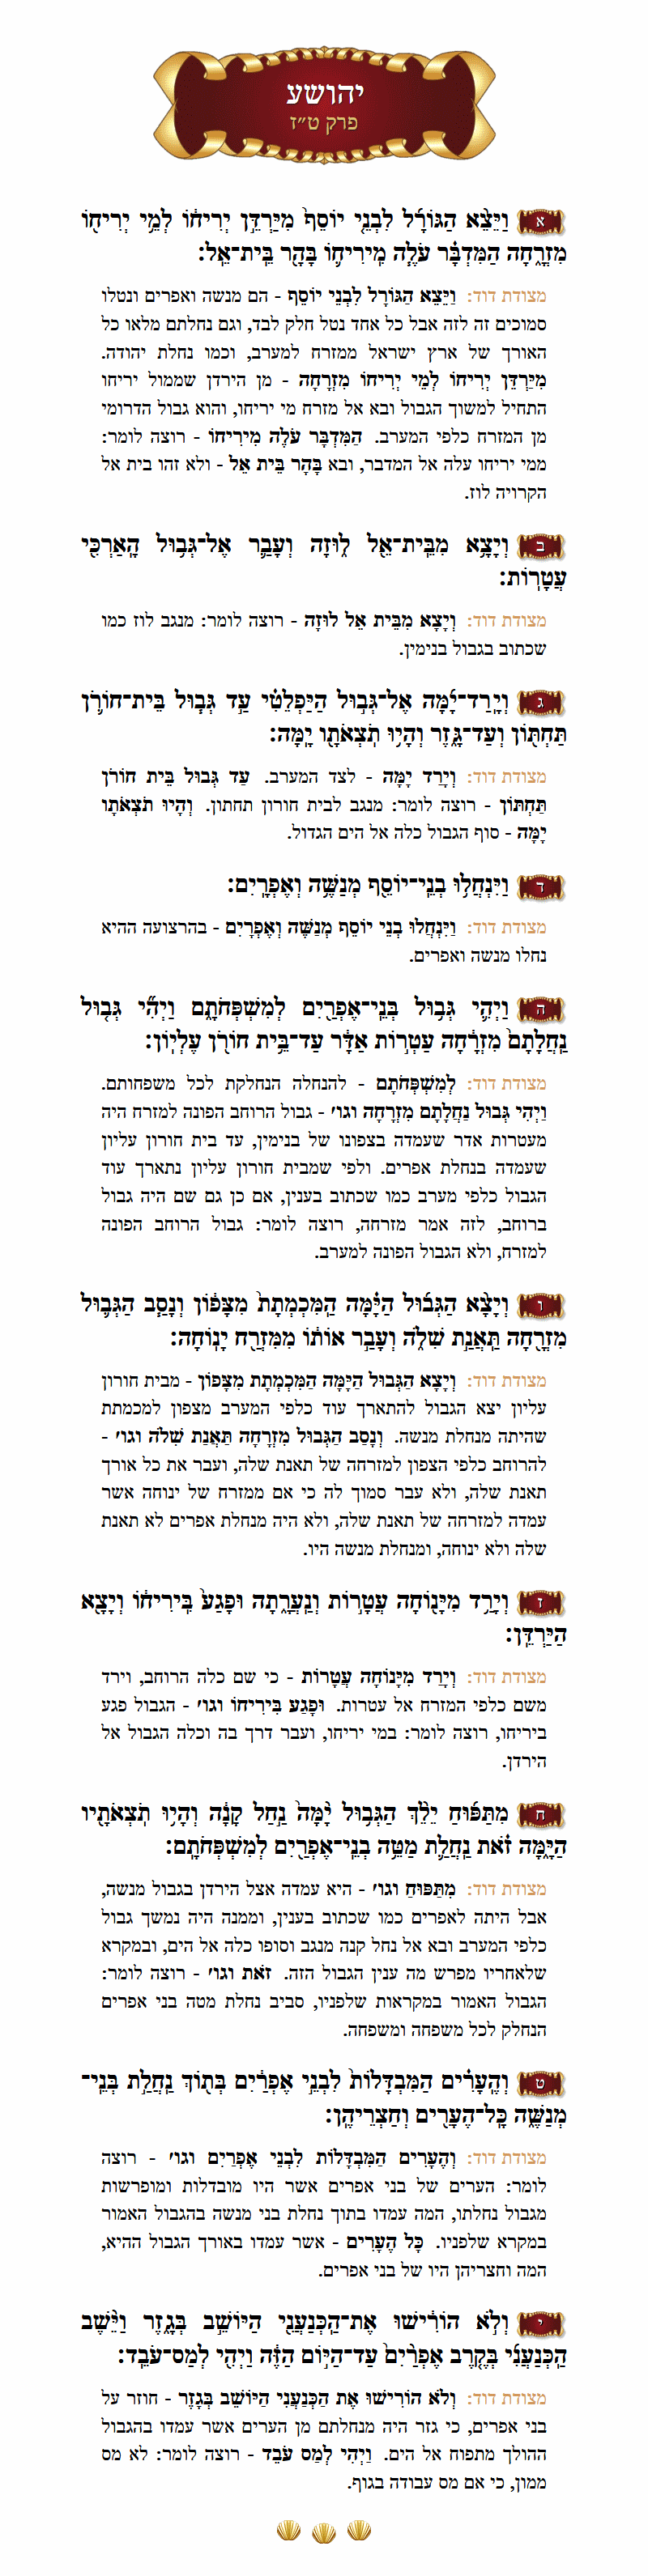 Sefer Yehoshua Chapter 16 with commentary